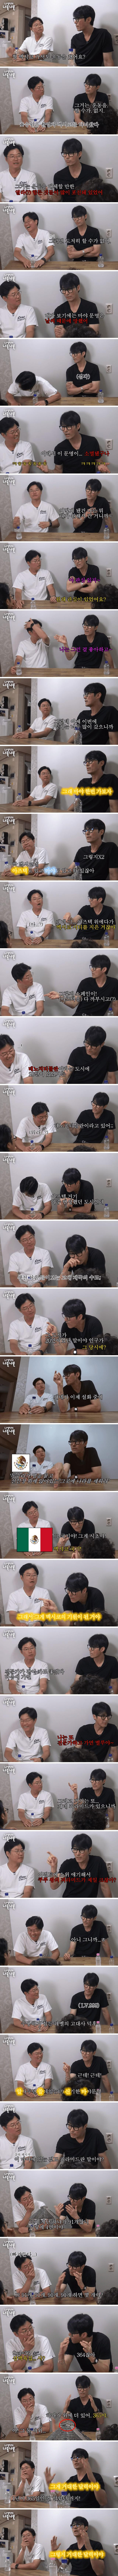 Unexpectedly, actor Cha Seung-won is a history fan